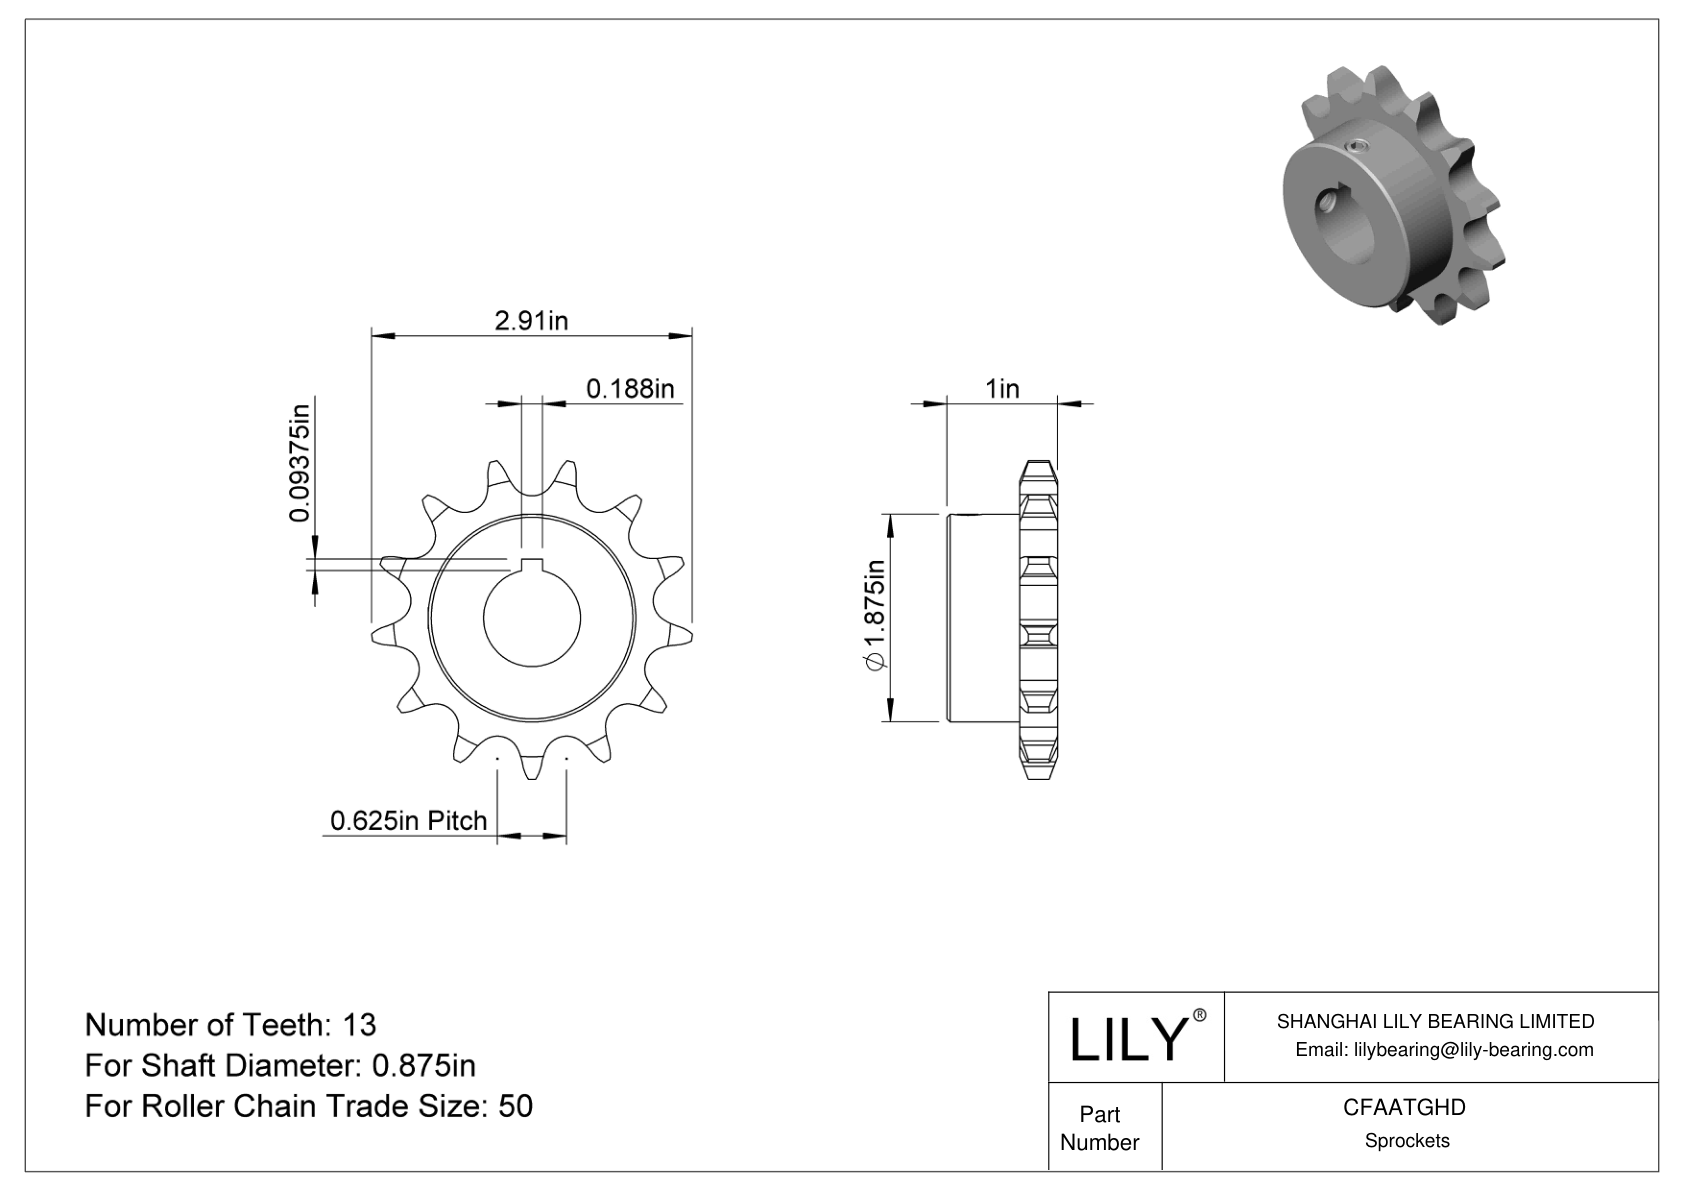 CFAATGHD Wear-Resistant Sprockets for ANSI Roller Chain cad drawing